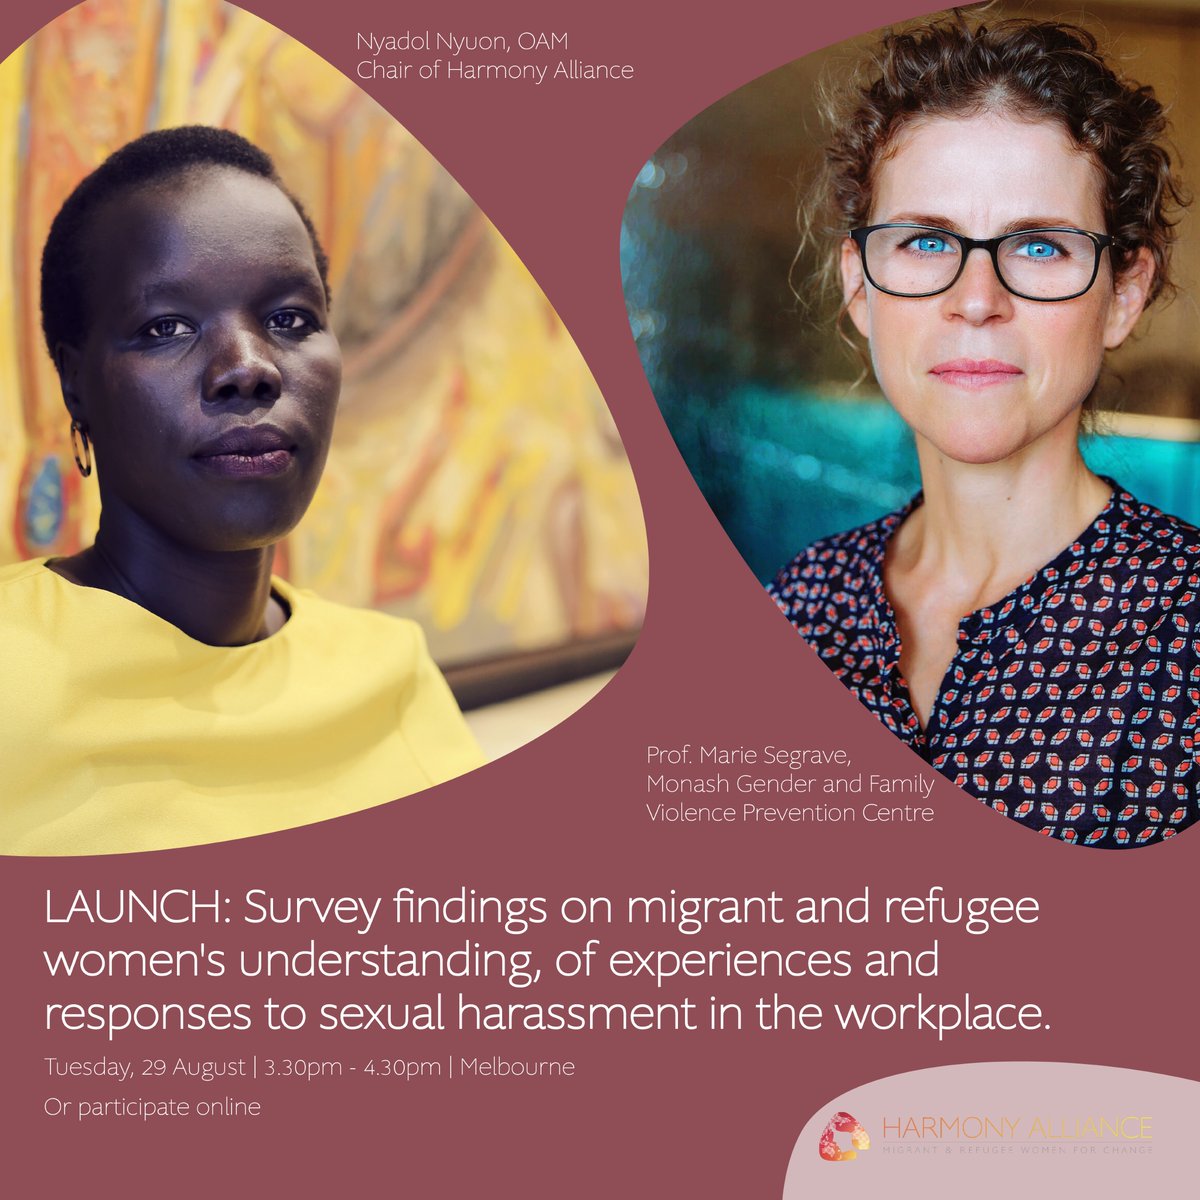 📣 Join us for the launch of survey findings on migrant & refugee women's experiences with workplace sexual harassment! 🙋🏻‍♀️🌏 🗓️ Aug 29, 3.30-4.30PM AEST 📍 Melbourne, VIC & Online 🔗 Register: lnkd.in/gsSWc3ww @ANROWS @MonashUni @Griffith_Uni @MonashGFV #WorkplaceRespect